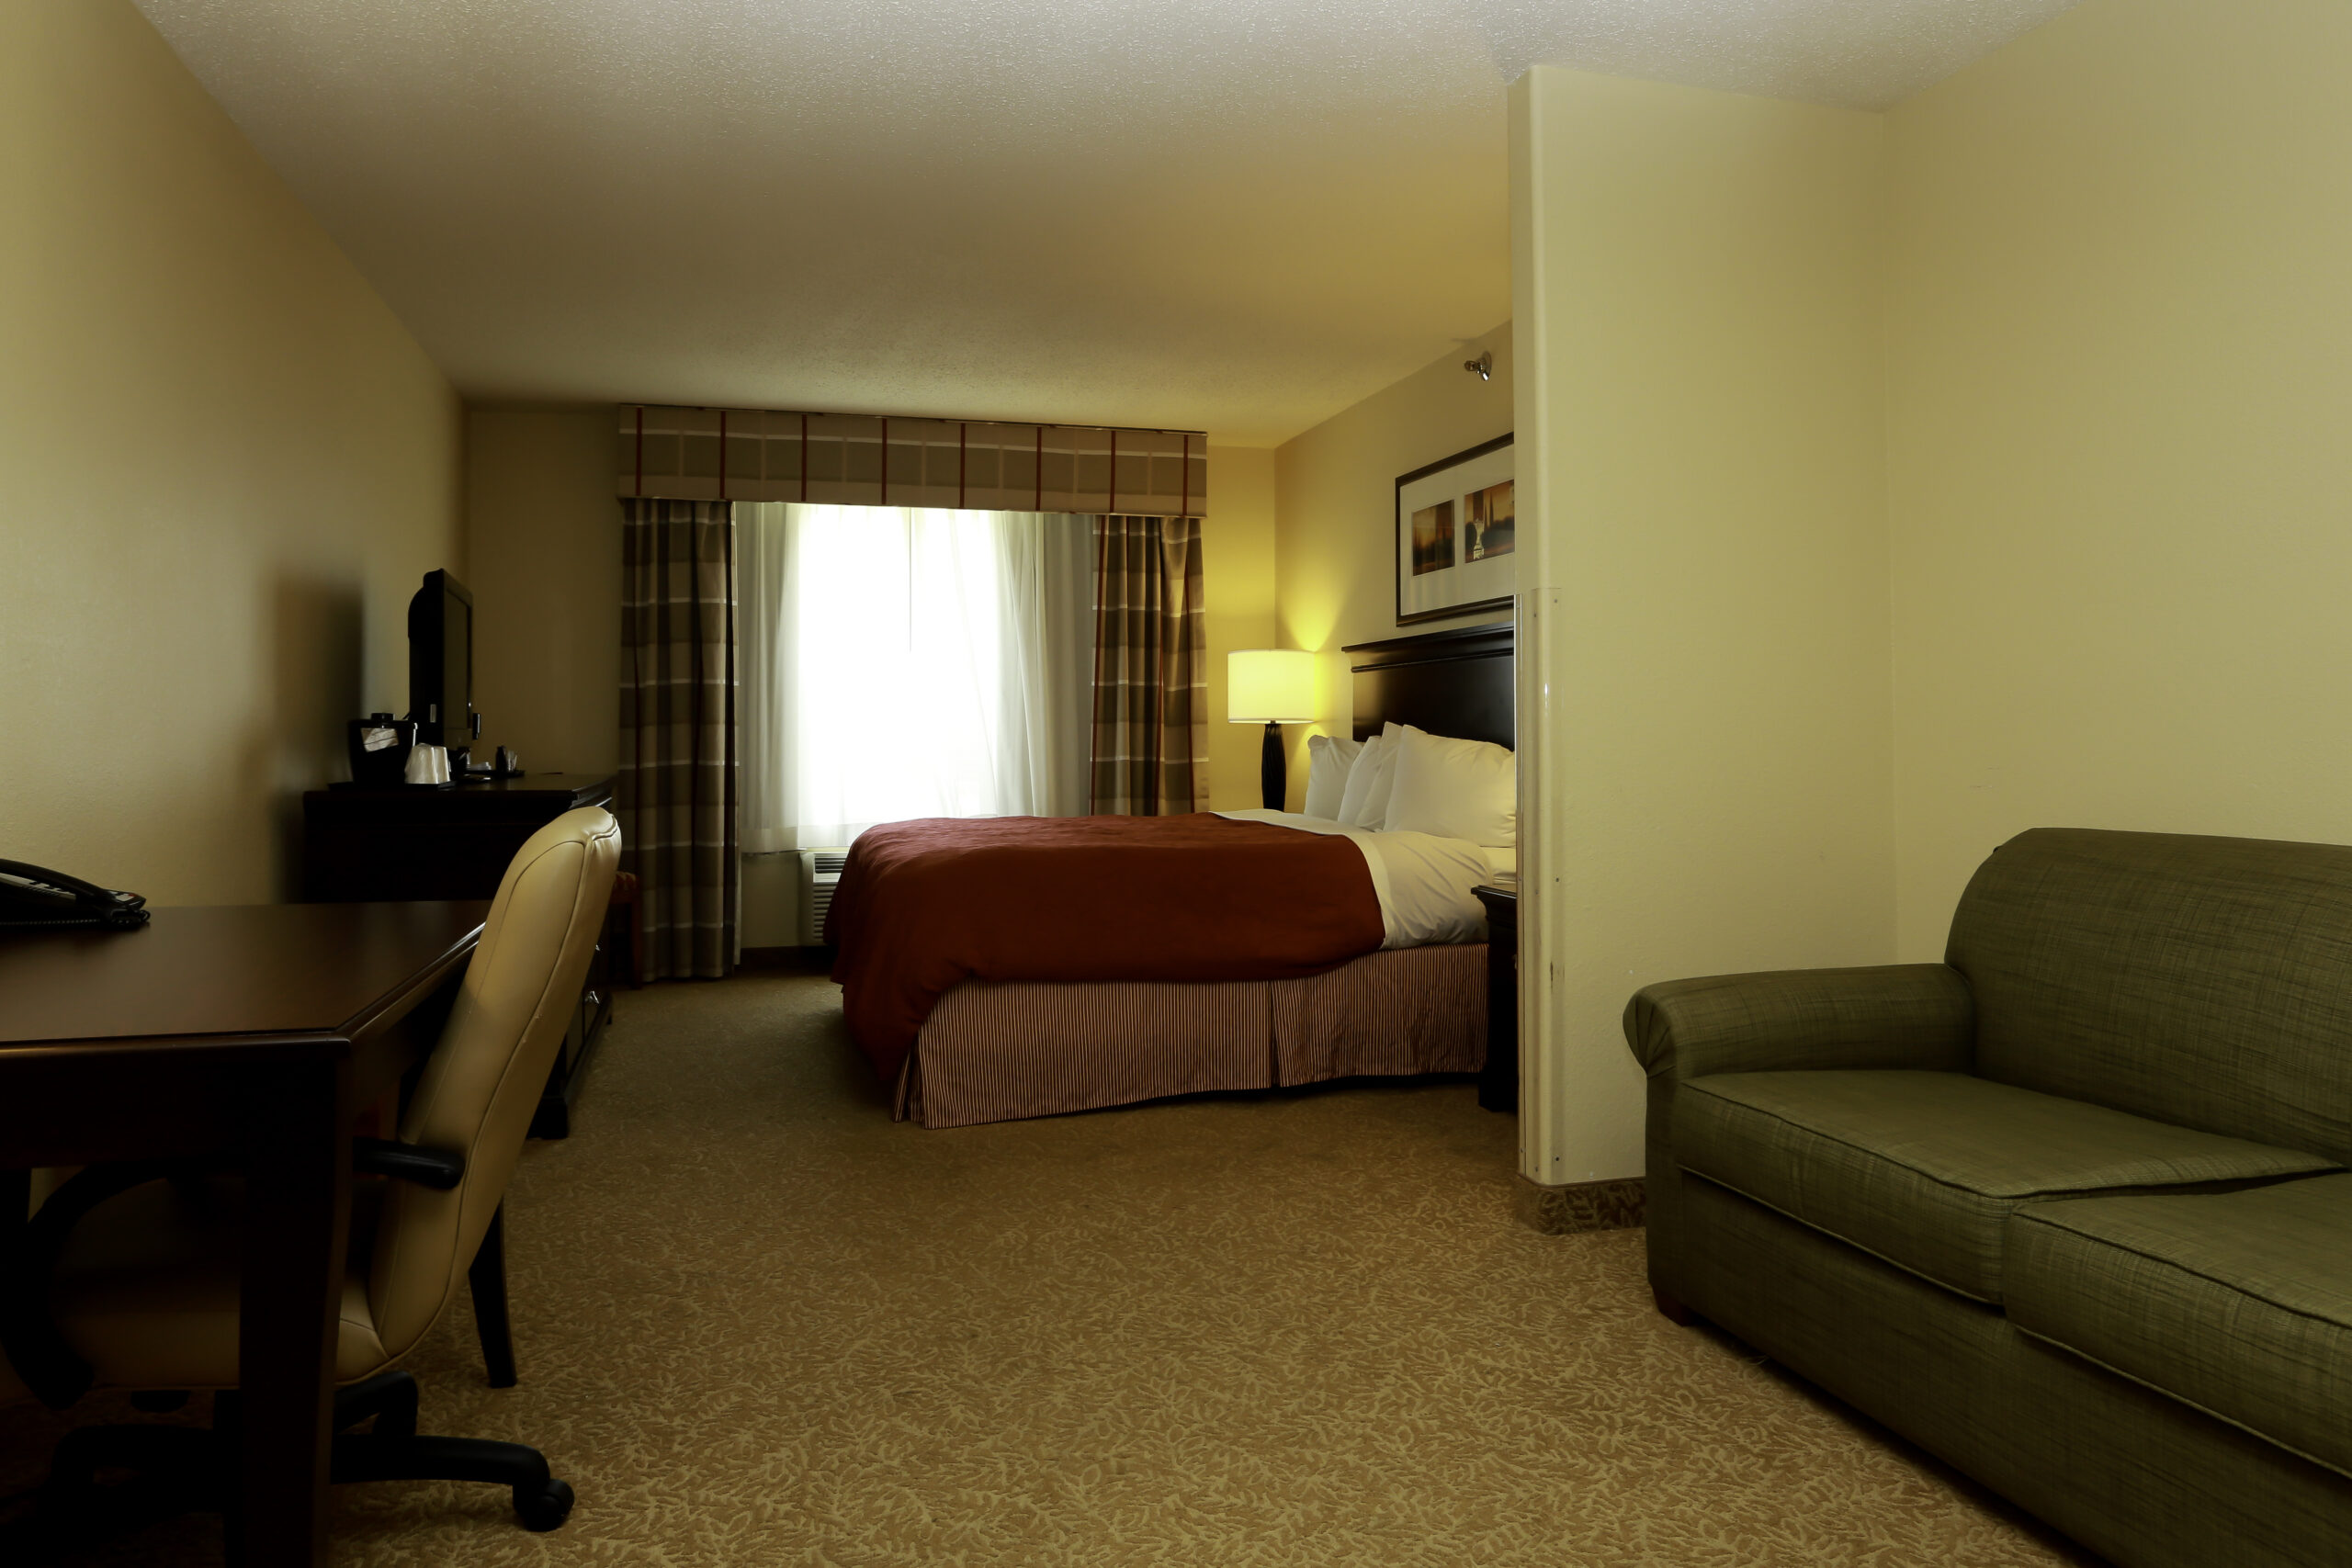 country-inn-and-suites-suite-bed-marion-illinois